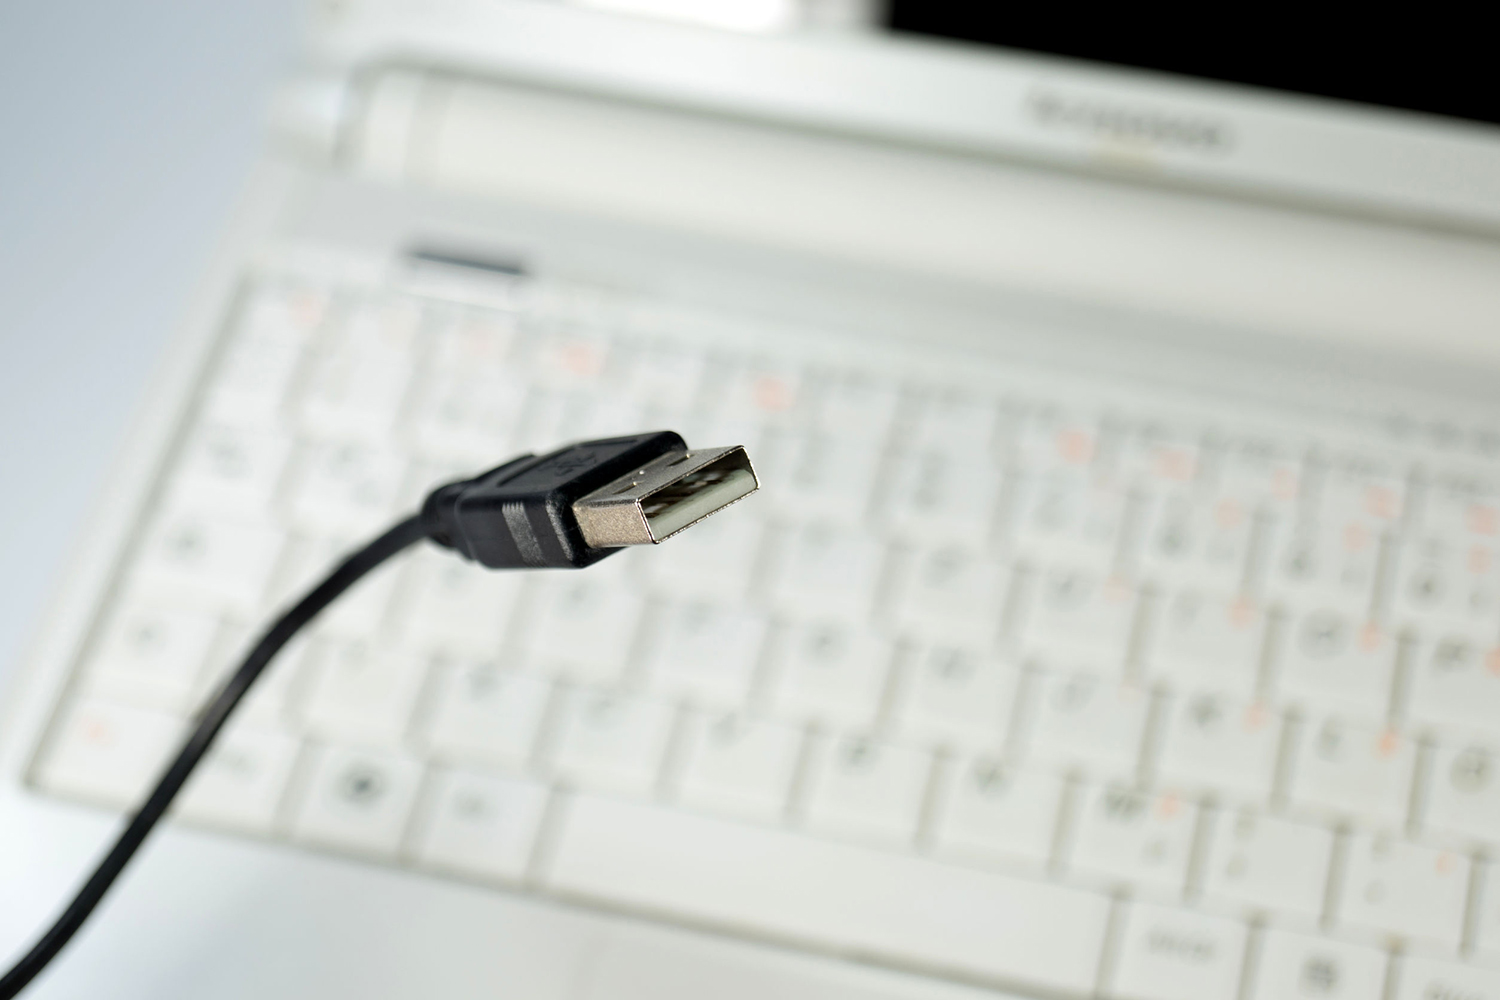 USB-A vs. USB-C: the difference? Trends